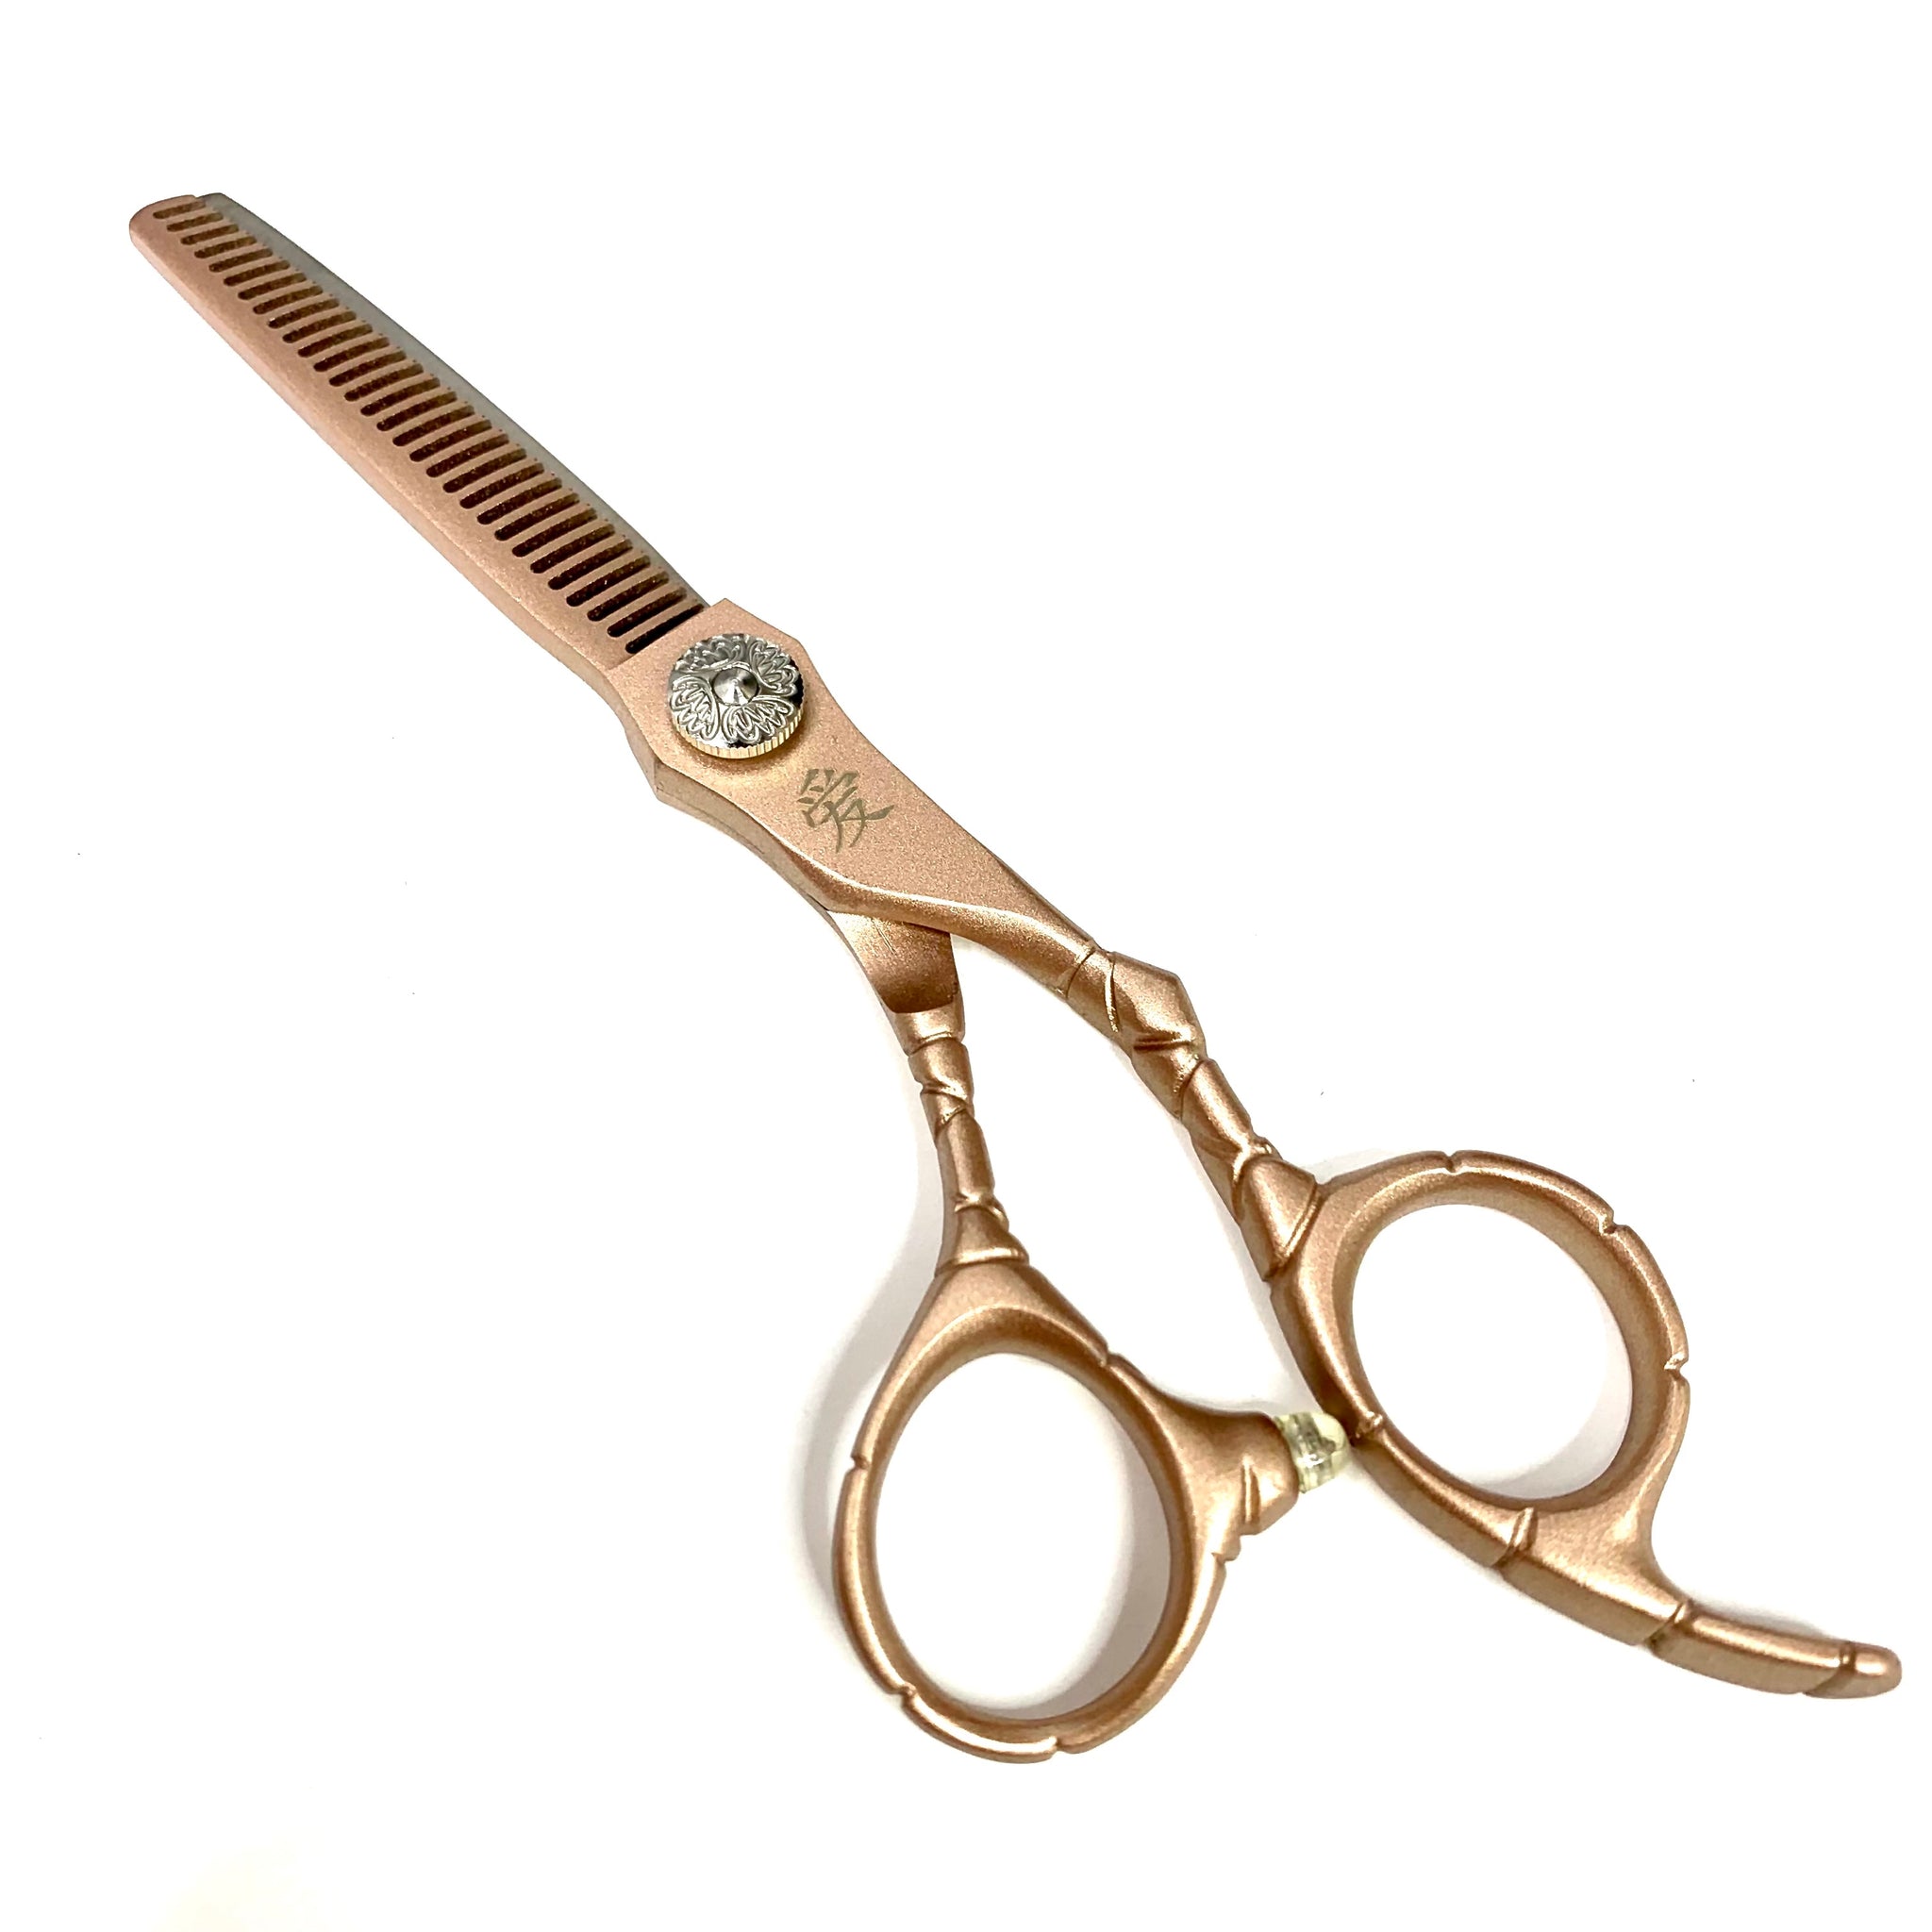 divine being, rose gold, thinning shear, lightweight, adjustable tension, scissors